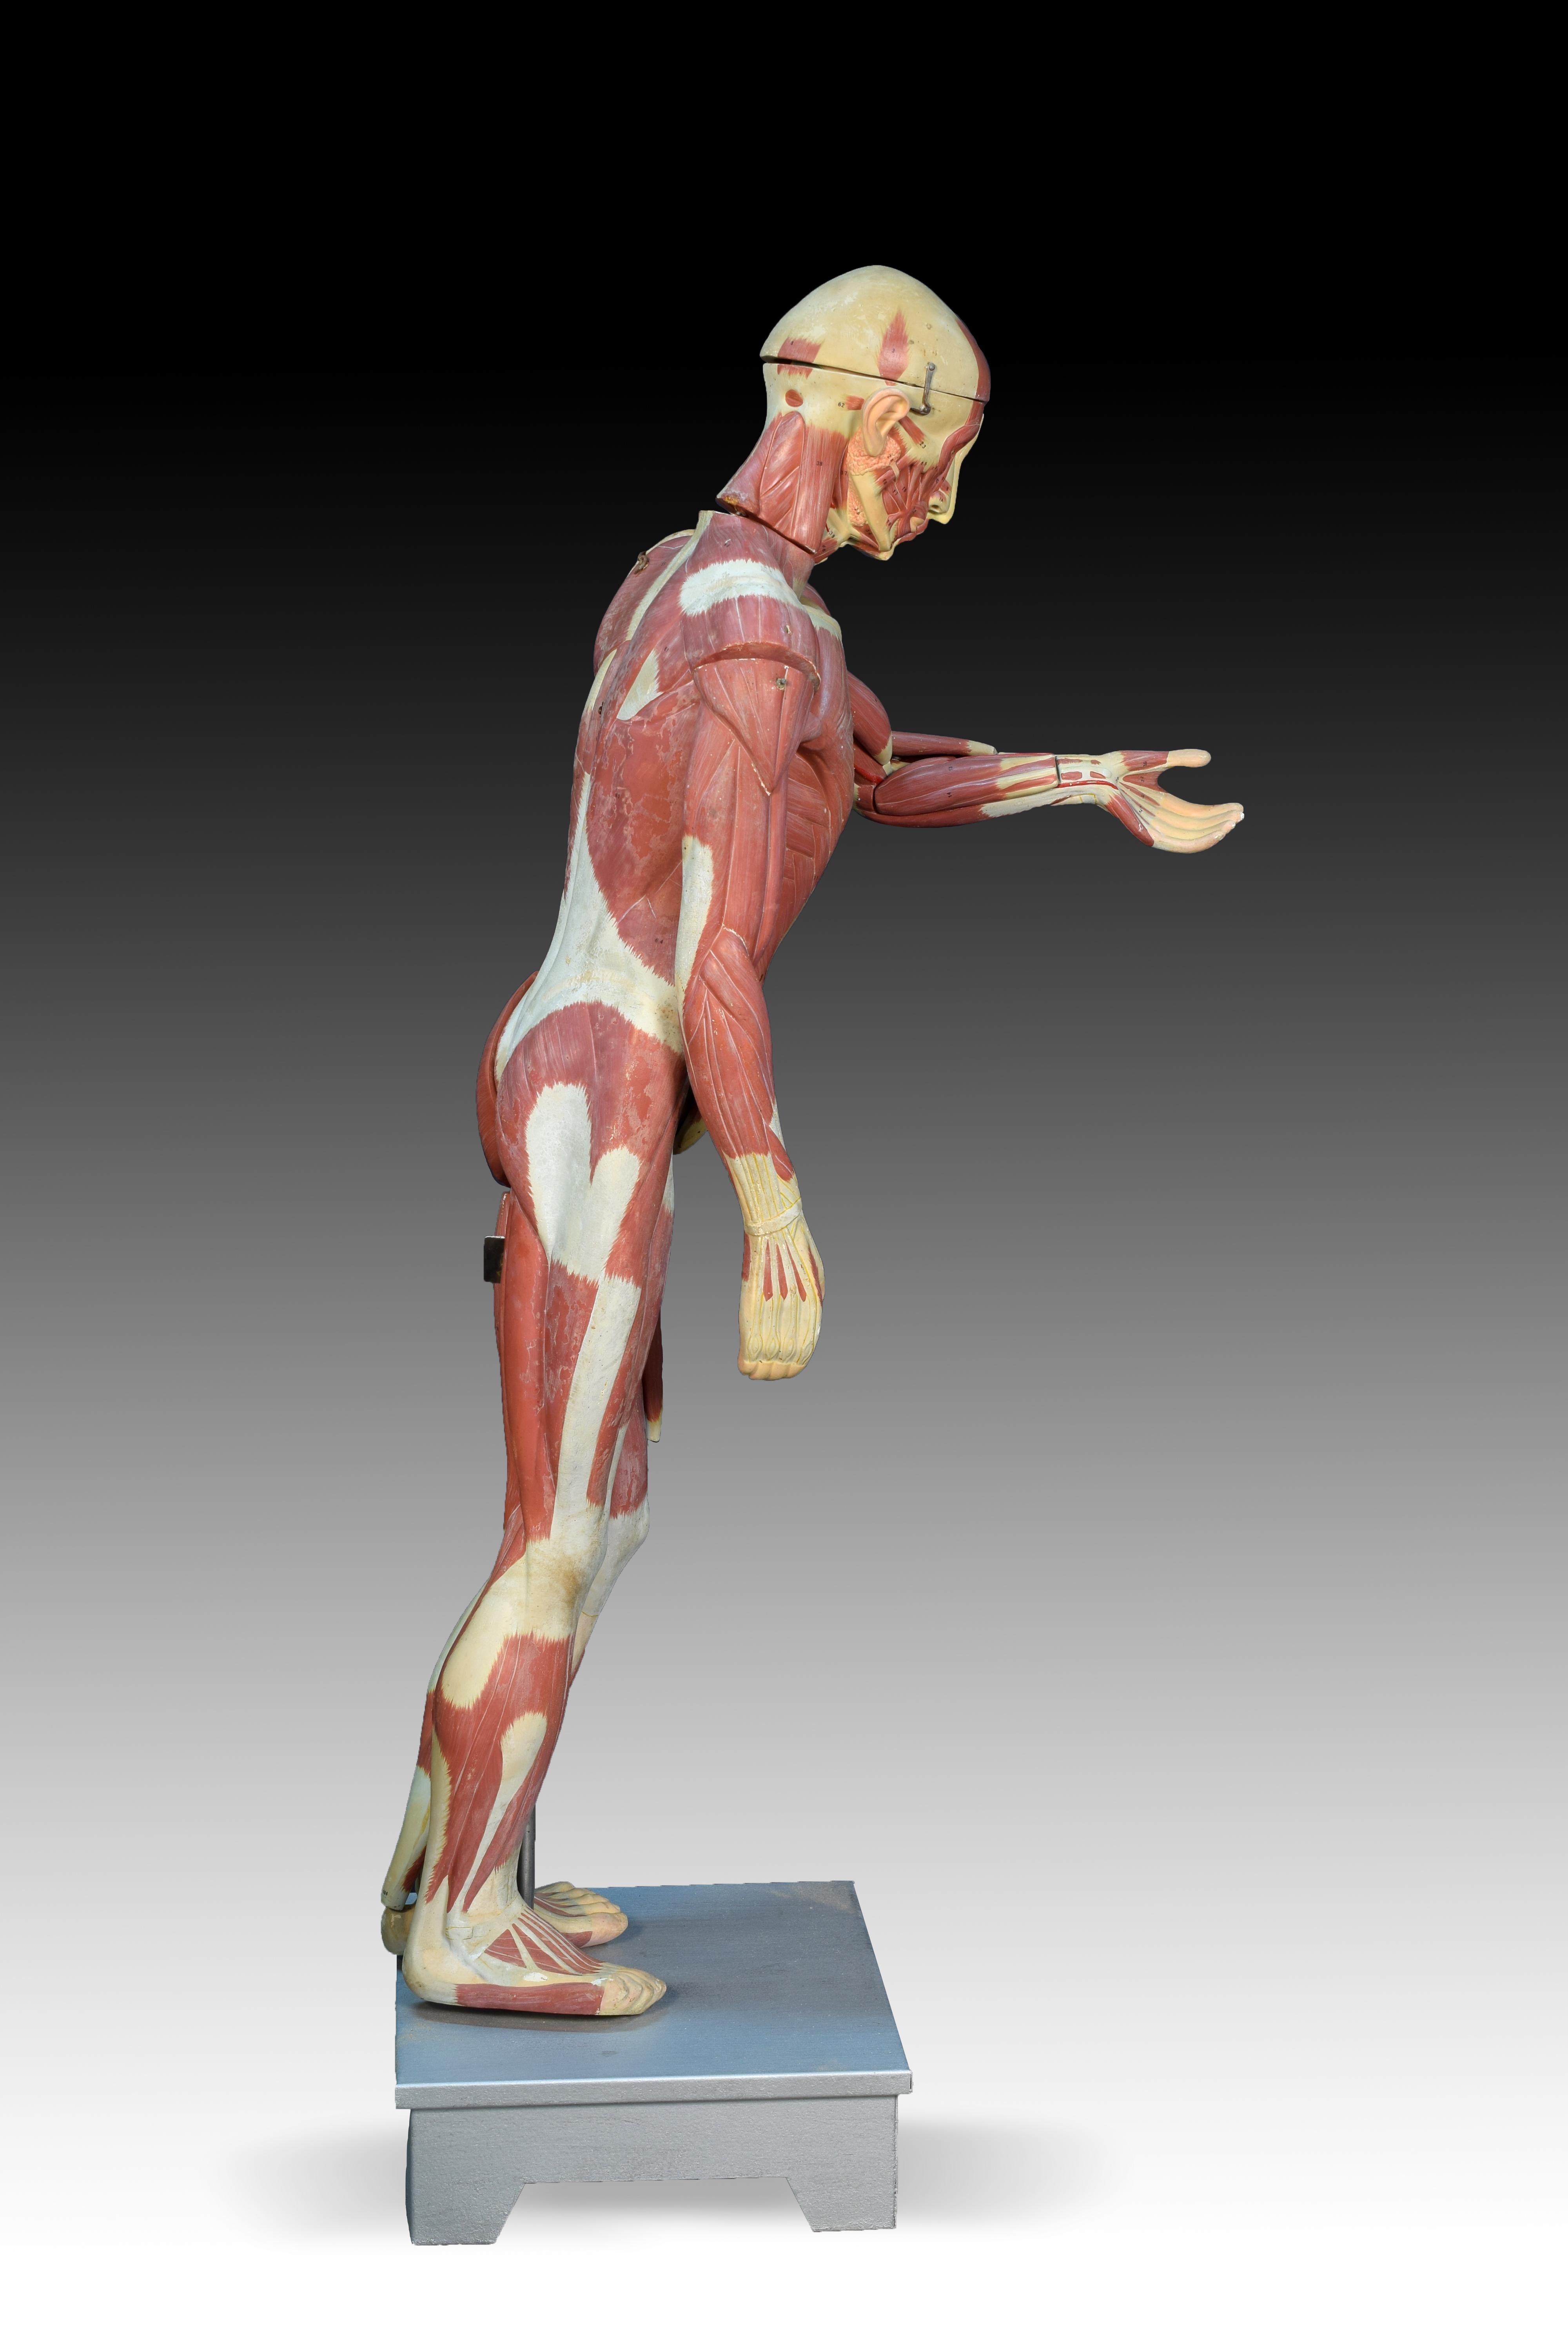 Anatomical model of the muscular system, circa 1950.
Perched on a square base, a skinless human figure stands with a staff on his back. It shows the different muscle layers, and they facilitate the study of a series of removable areas and small